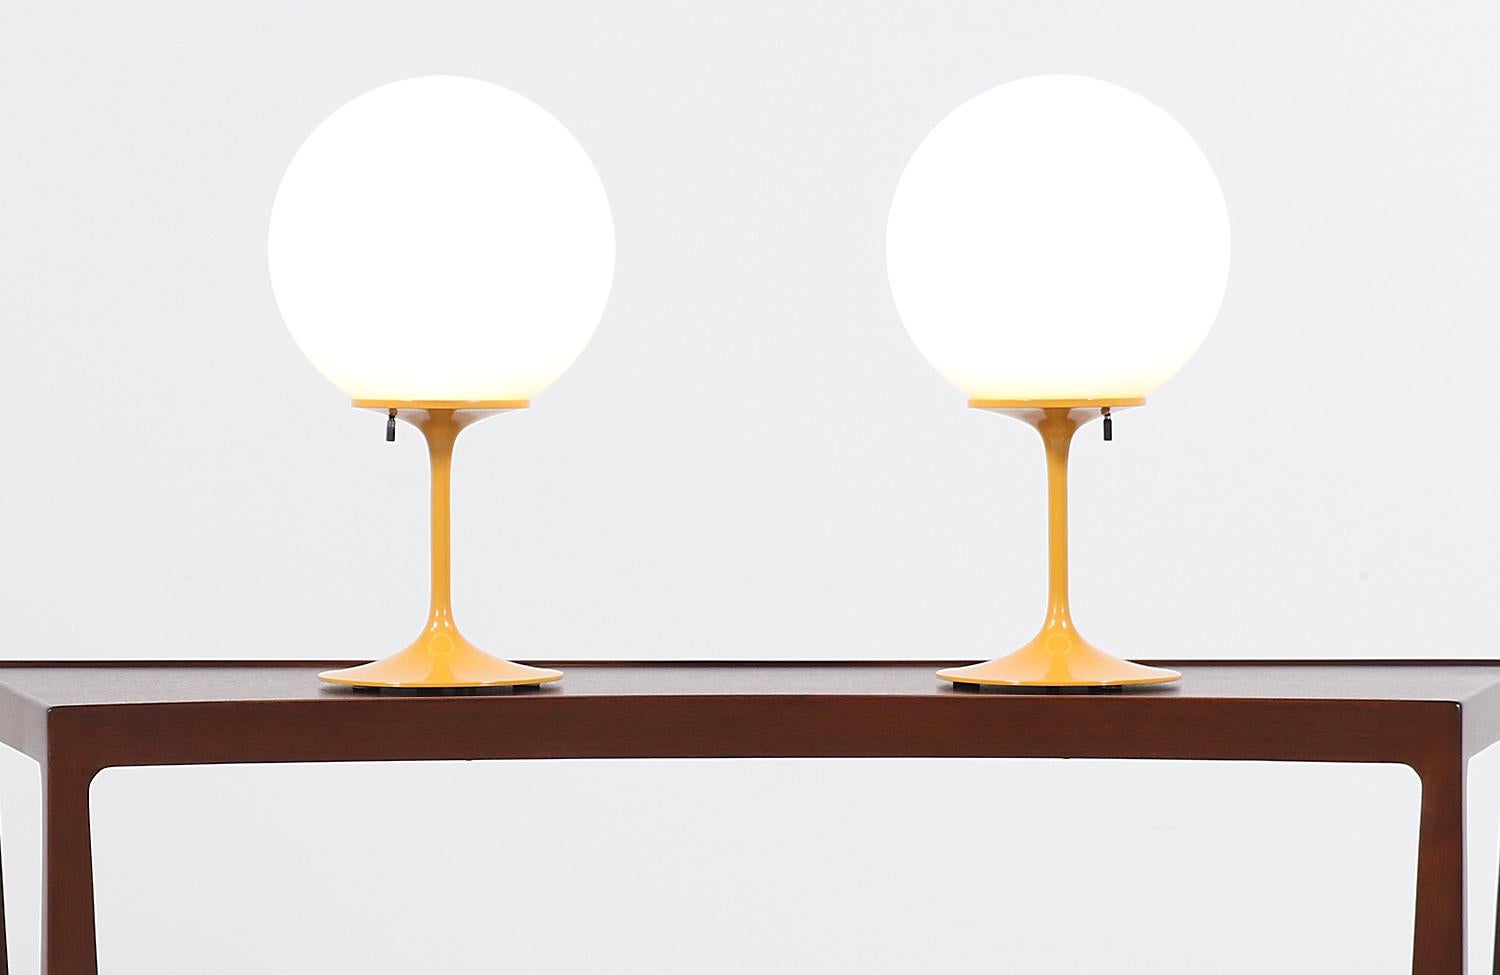 Classic modern table lamps designed by Los Angeles based designer Bill Curry for Design Line's 